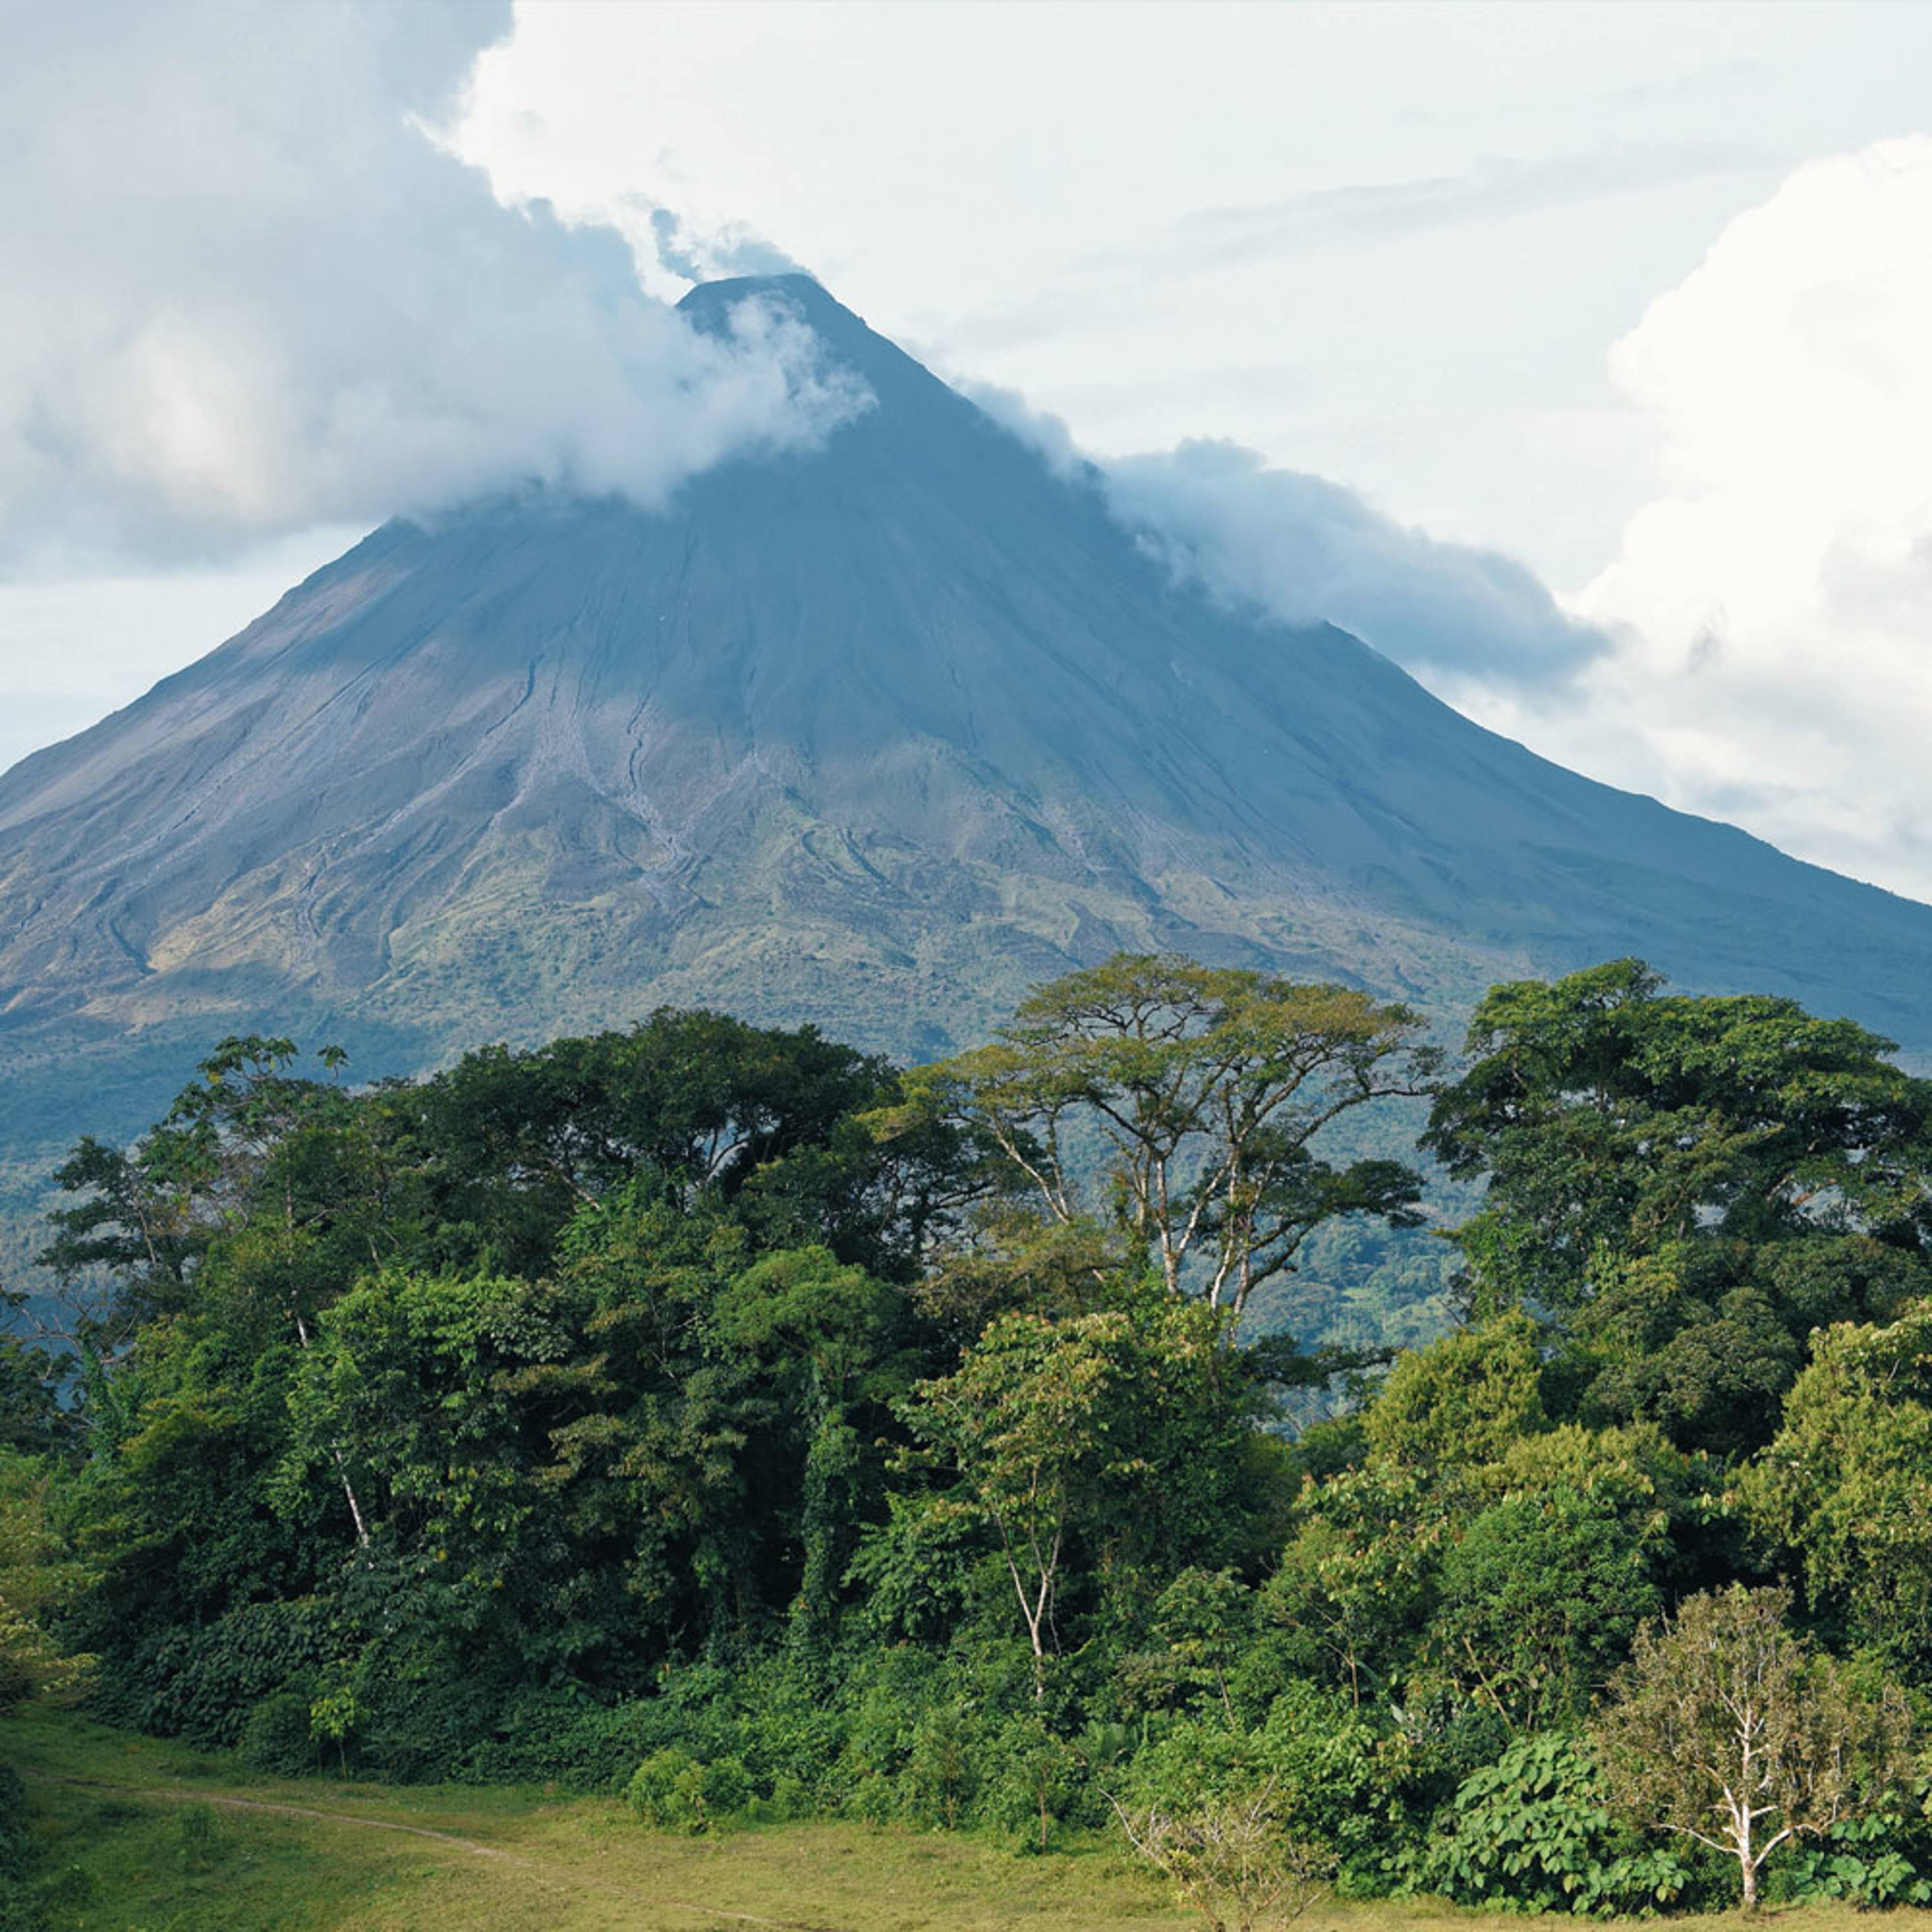 Design your perfect volcano tour with a local expert in Costa Rica